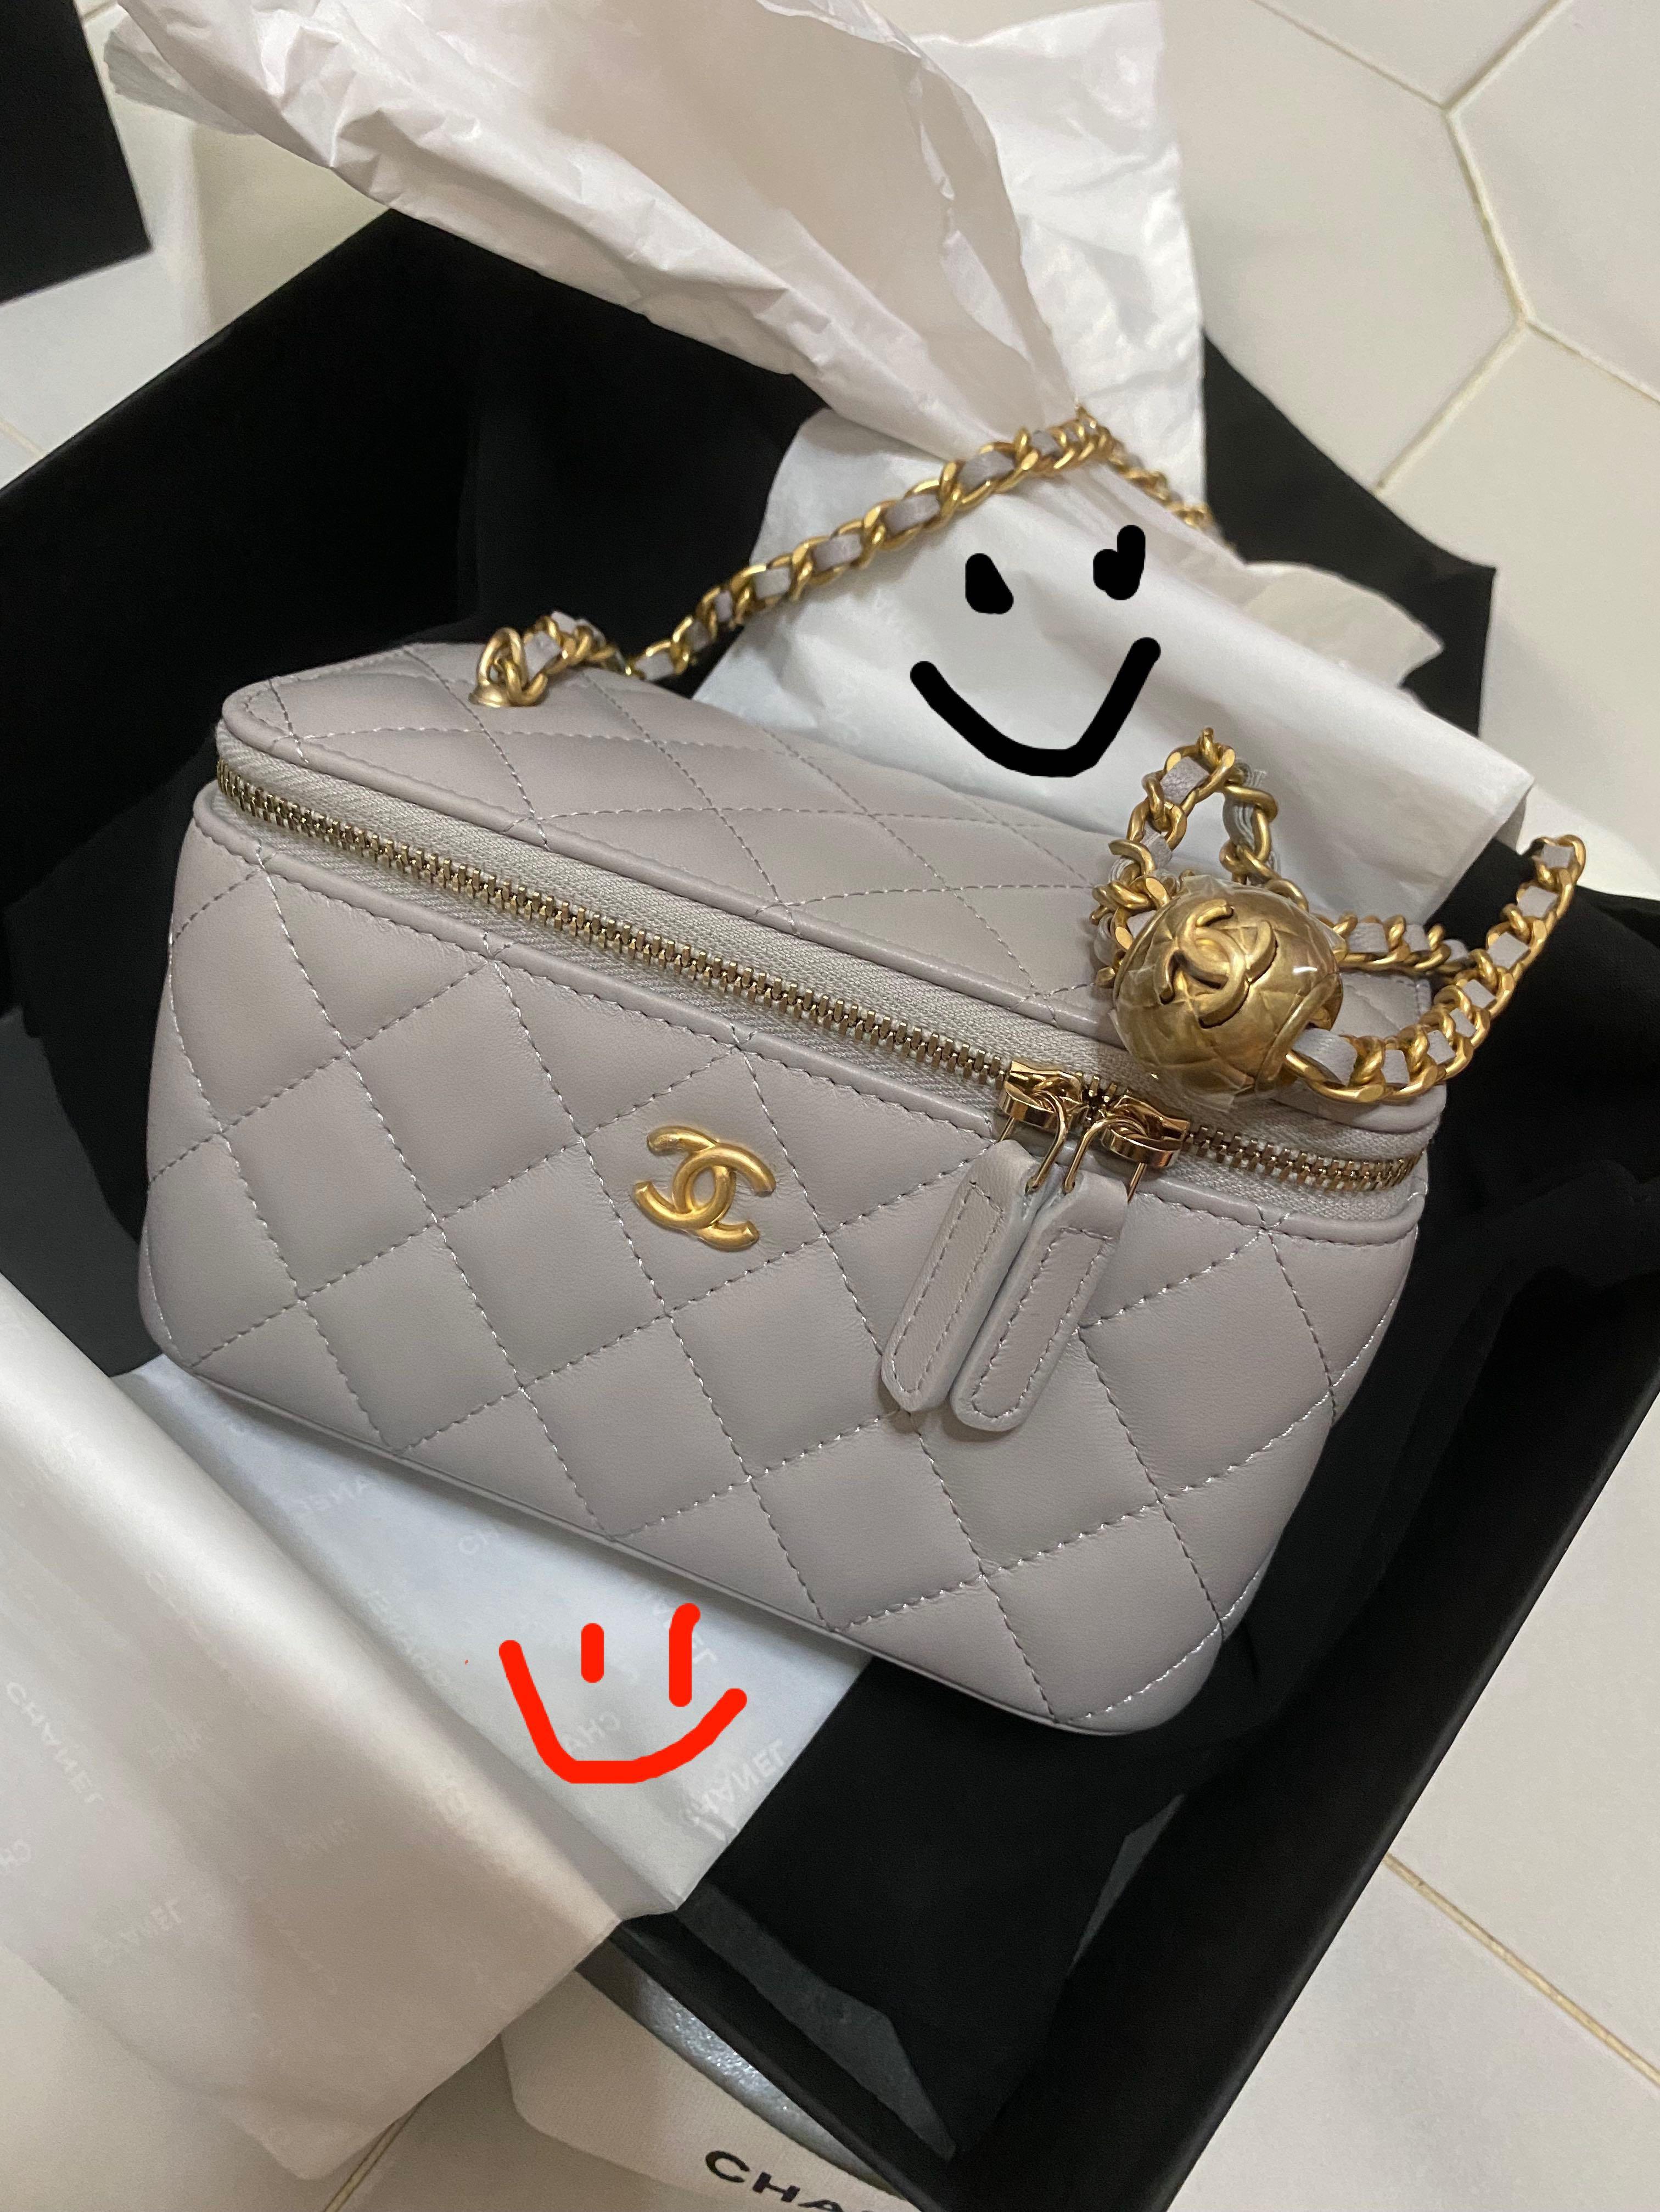 CHANEL 22 VANITY CASE BAG - 2022 / 22B NEW Collection : Unboxing / Modshots  / what fits?! 